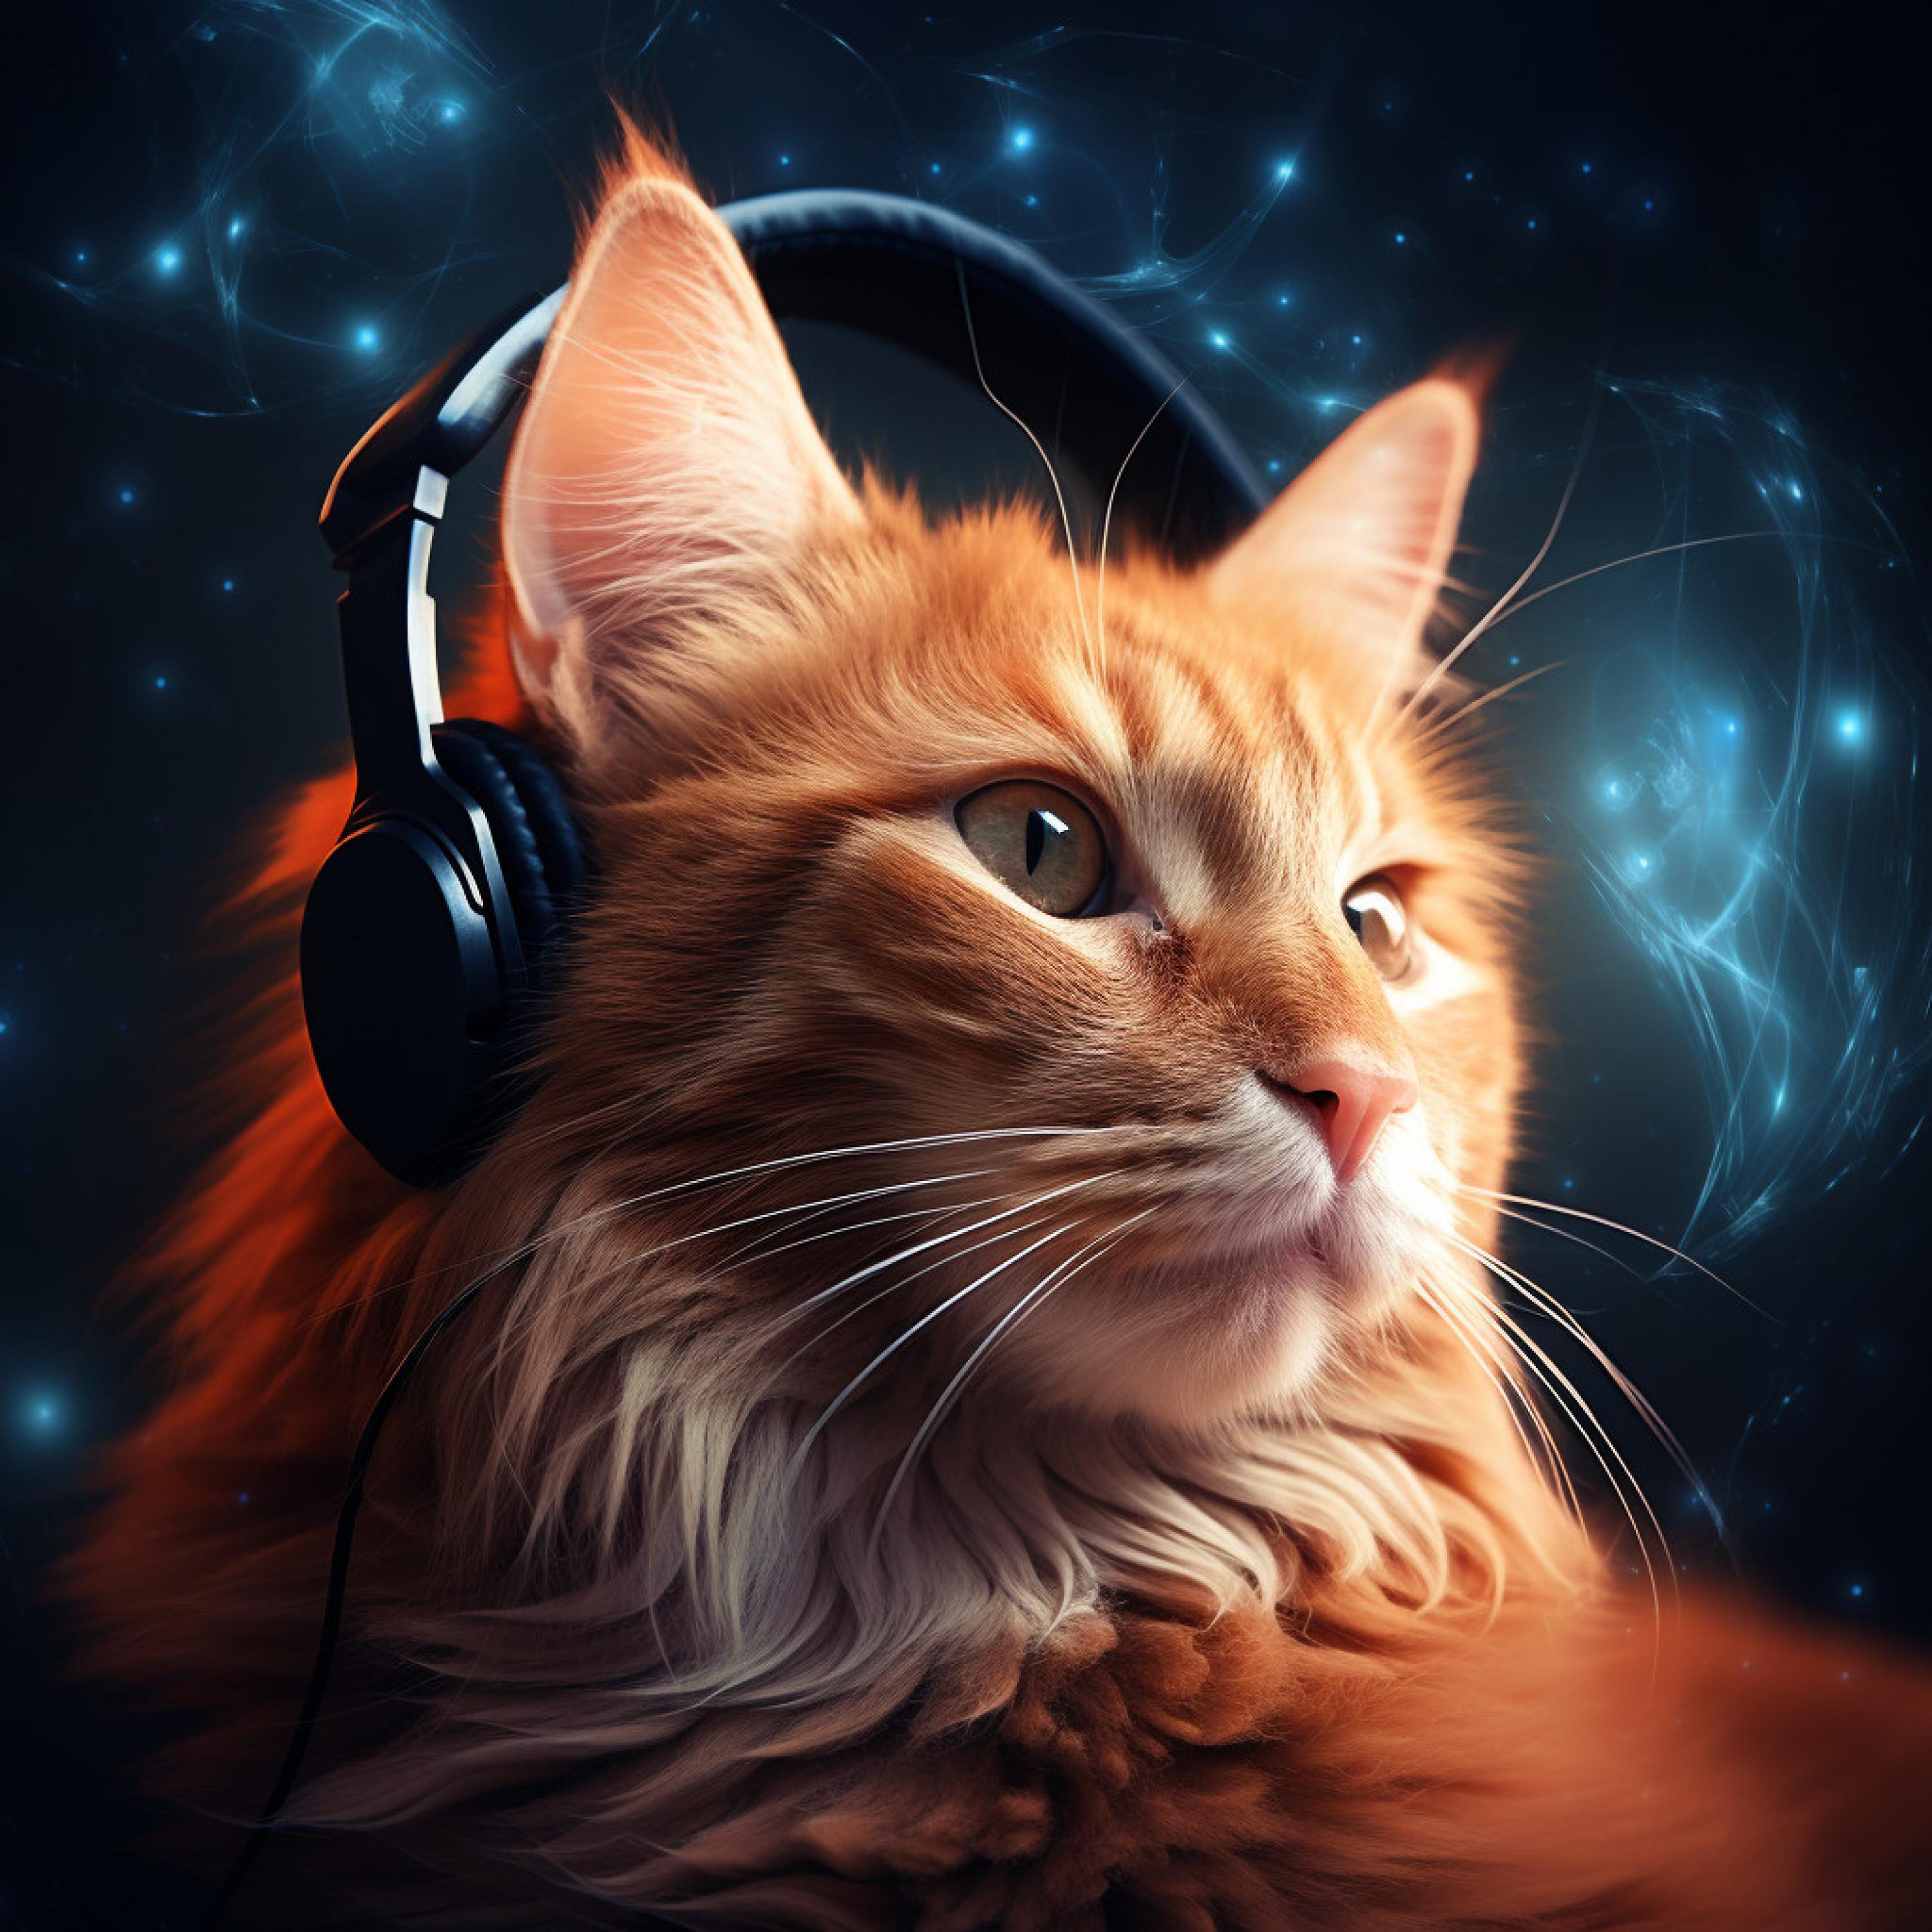 Calm Music for Cats - Relaxing Tune for Cats